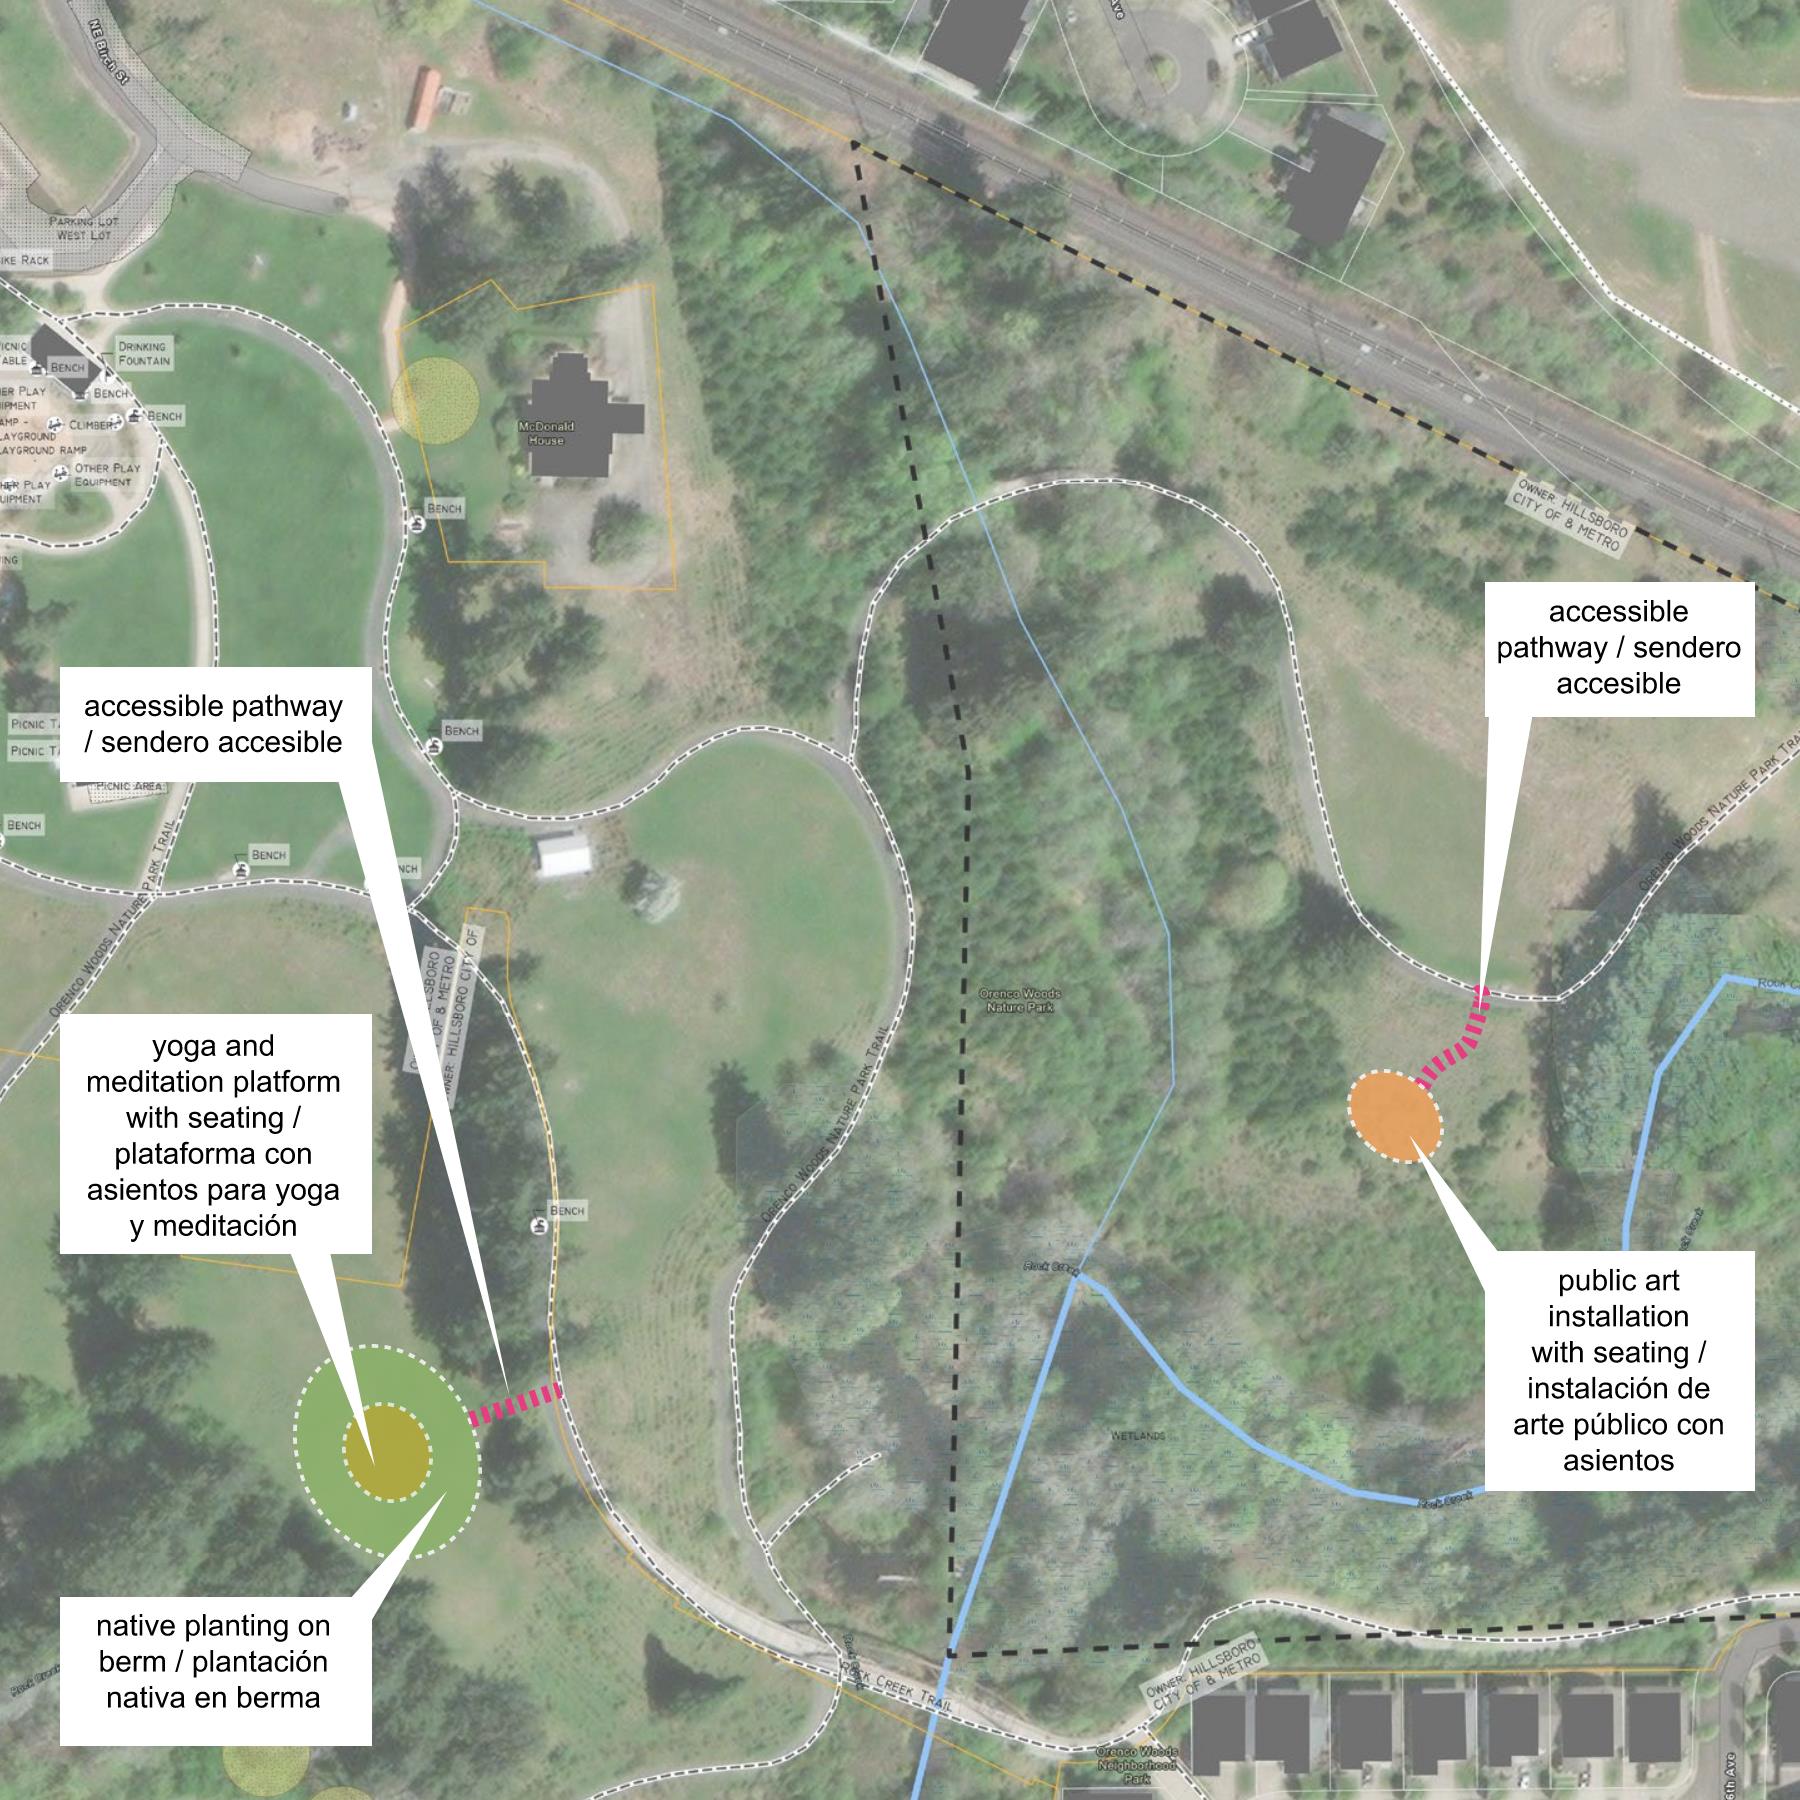 Image alt text: Nestled into the beautiful Orenco Woods Nature Park, two new moments for serenity are proposed. A public art installation with seating will be off the eastern trails into a clearing surrounded by existing trees with an accessible pathway linking it to the existing trail. A proposed berm south of the existing play area will provide space for yoga and meditation with a platform and seating. This quite space will be surrounded by native plantings to seamless integrate with the surrounding meadows.